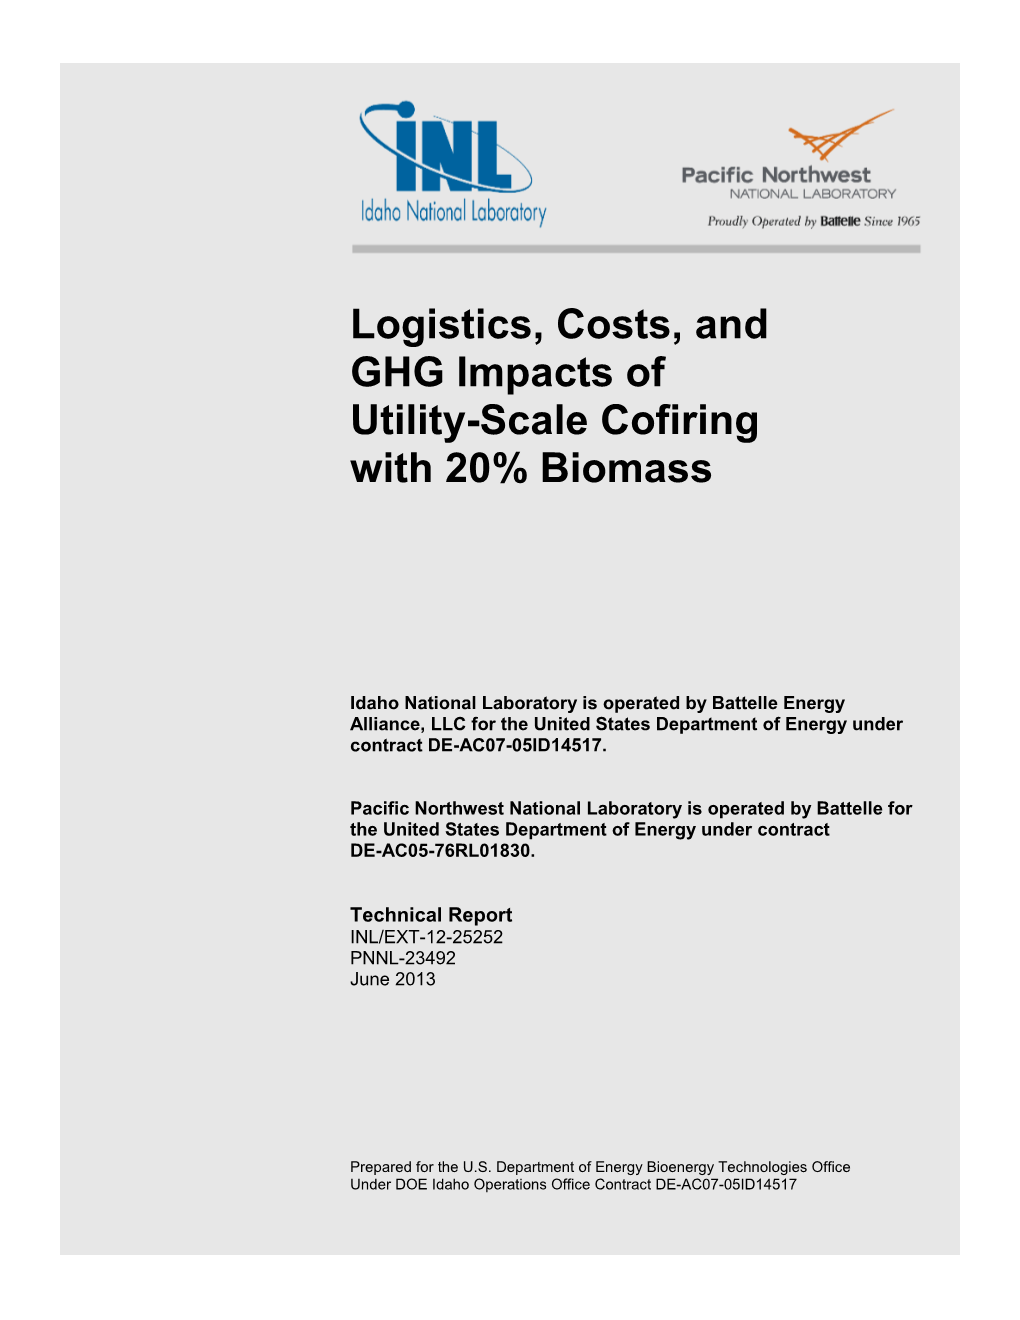 Logistics, Costs, and GHG Impacts of Utility-Scale Cofiring with 20% Biomass